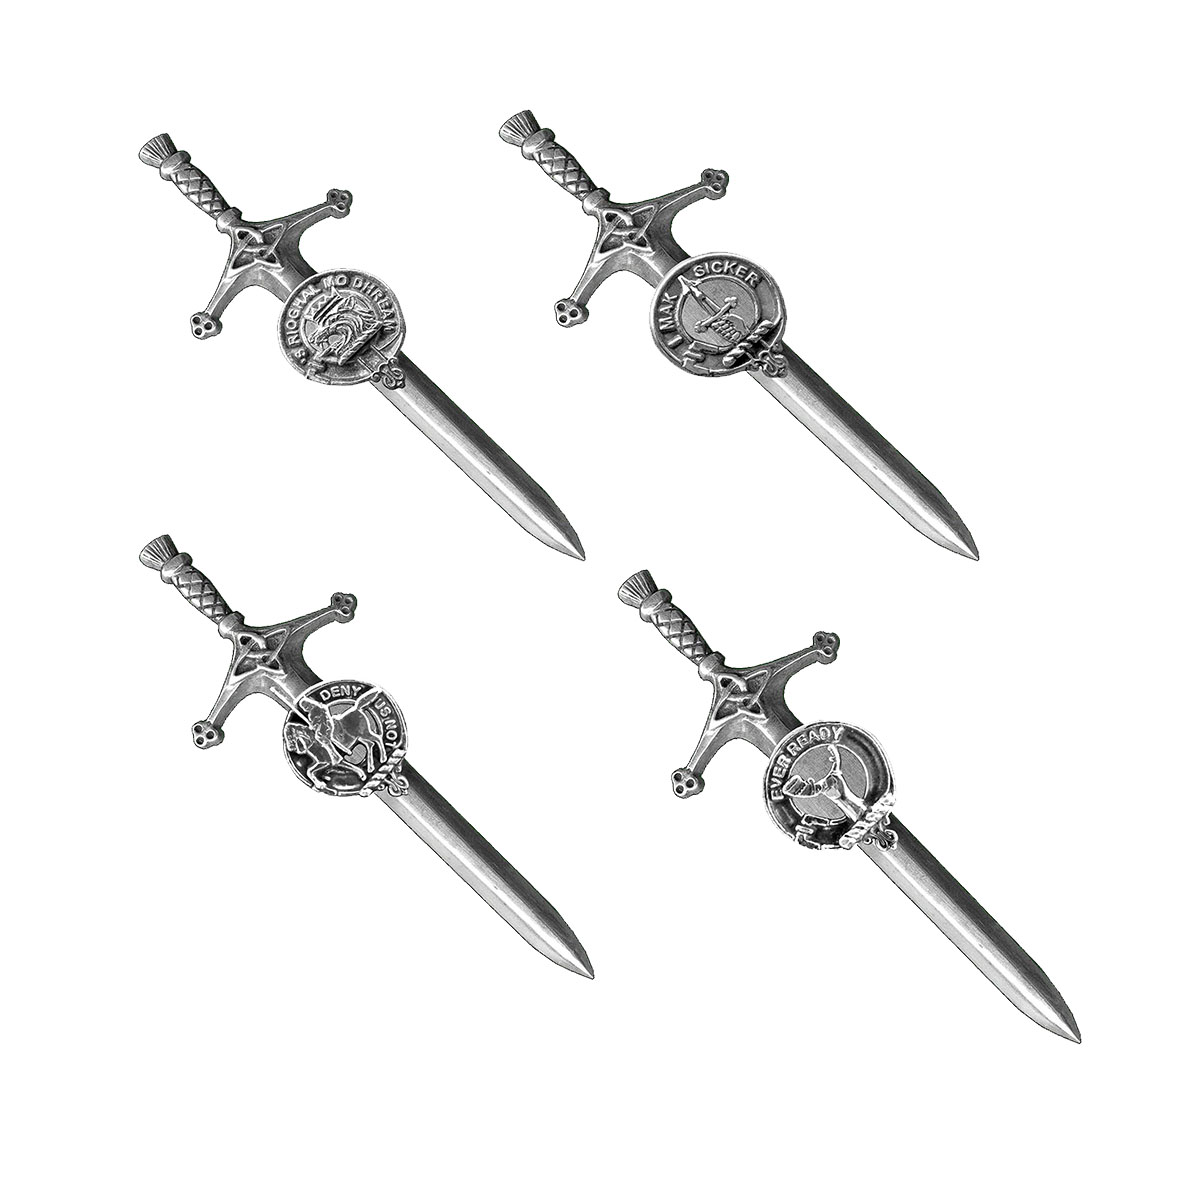 A set of four Clan Crest Pewter Kilt Pins, displayed on a white background.